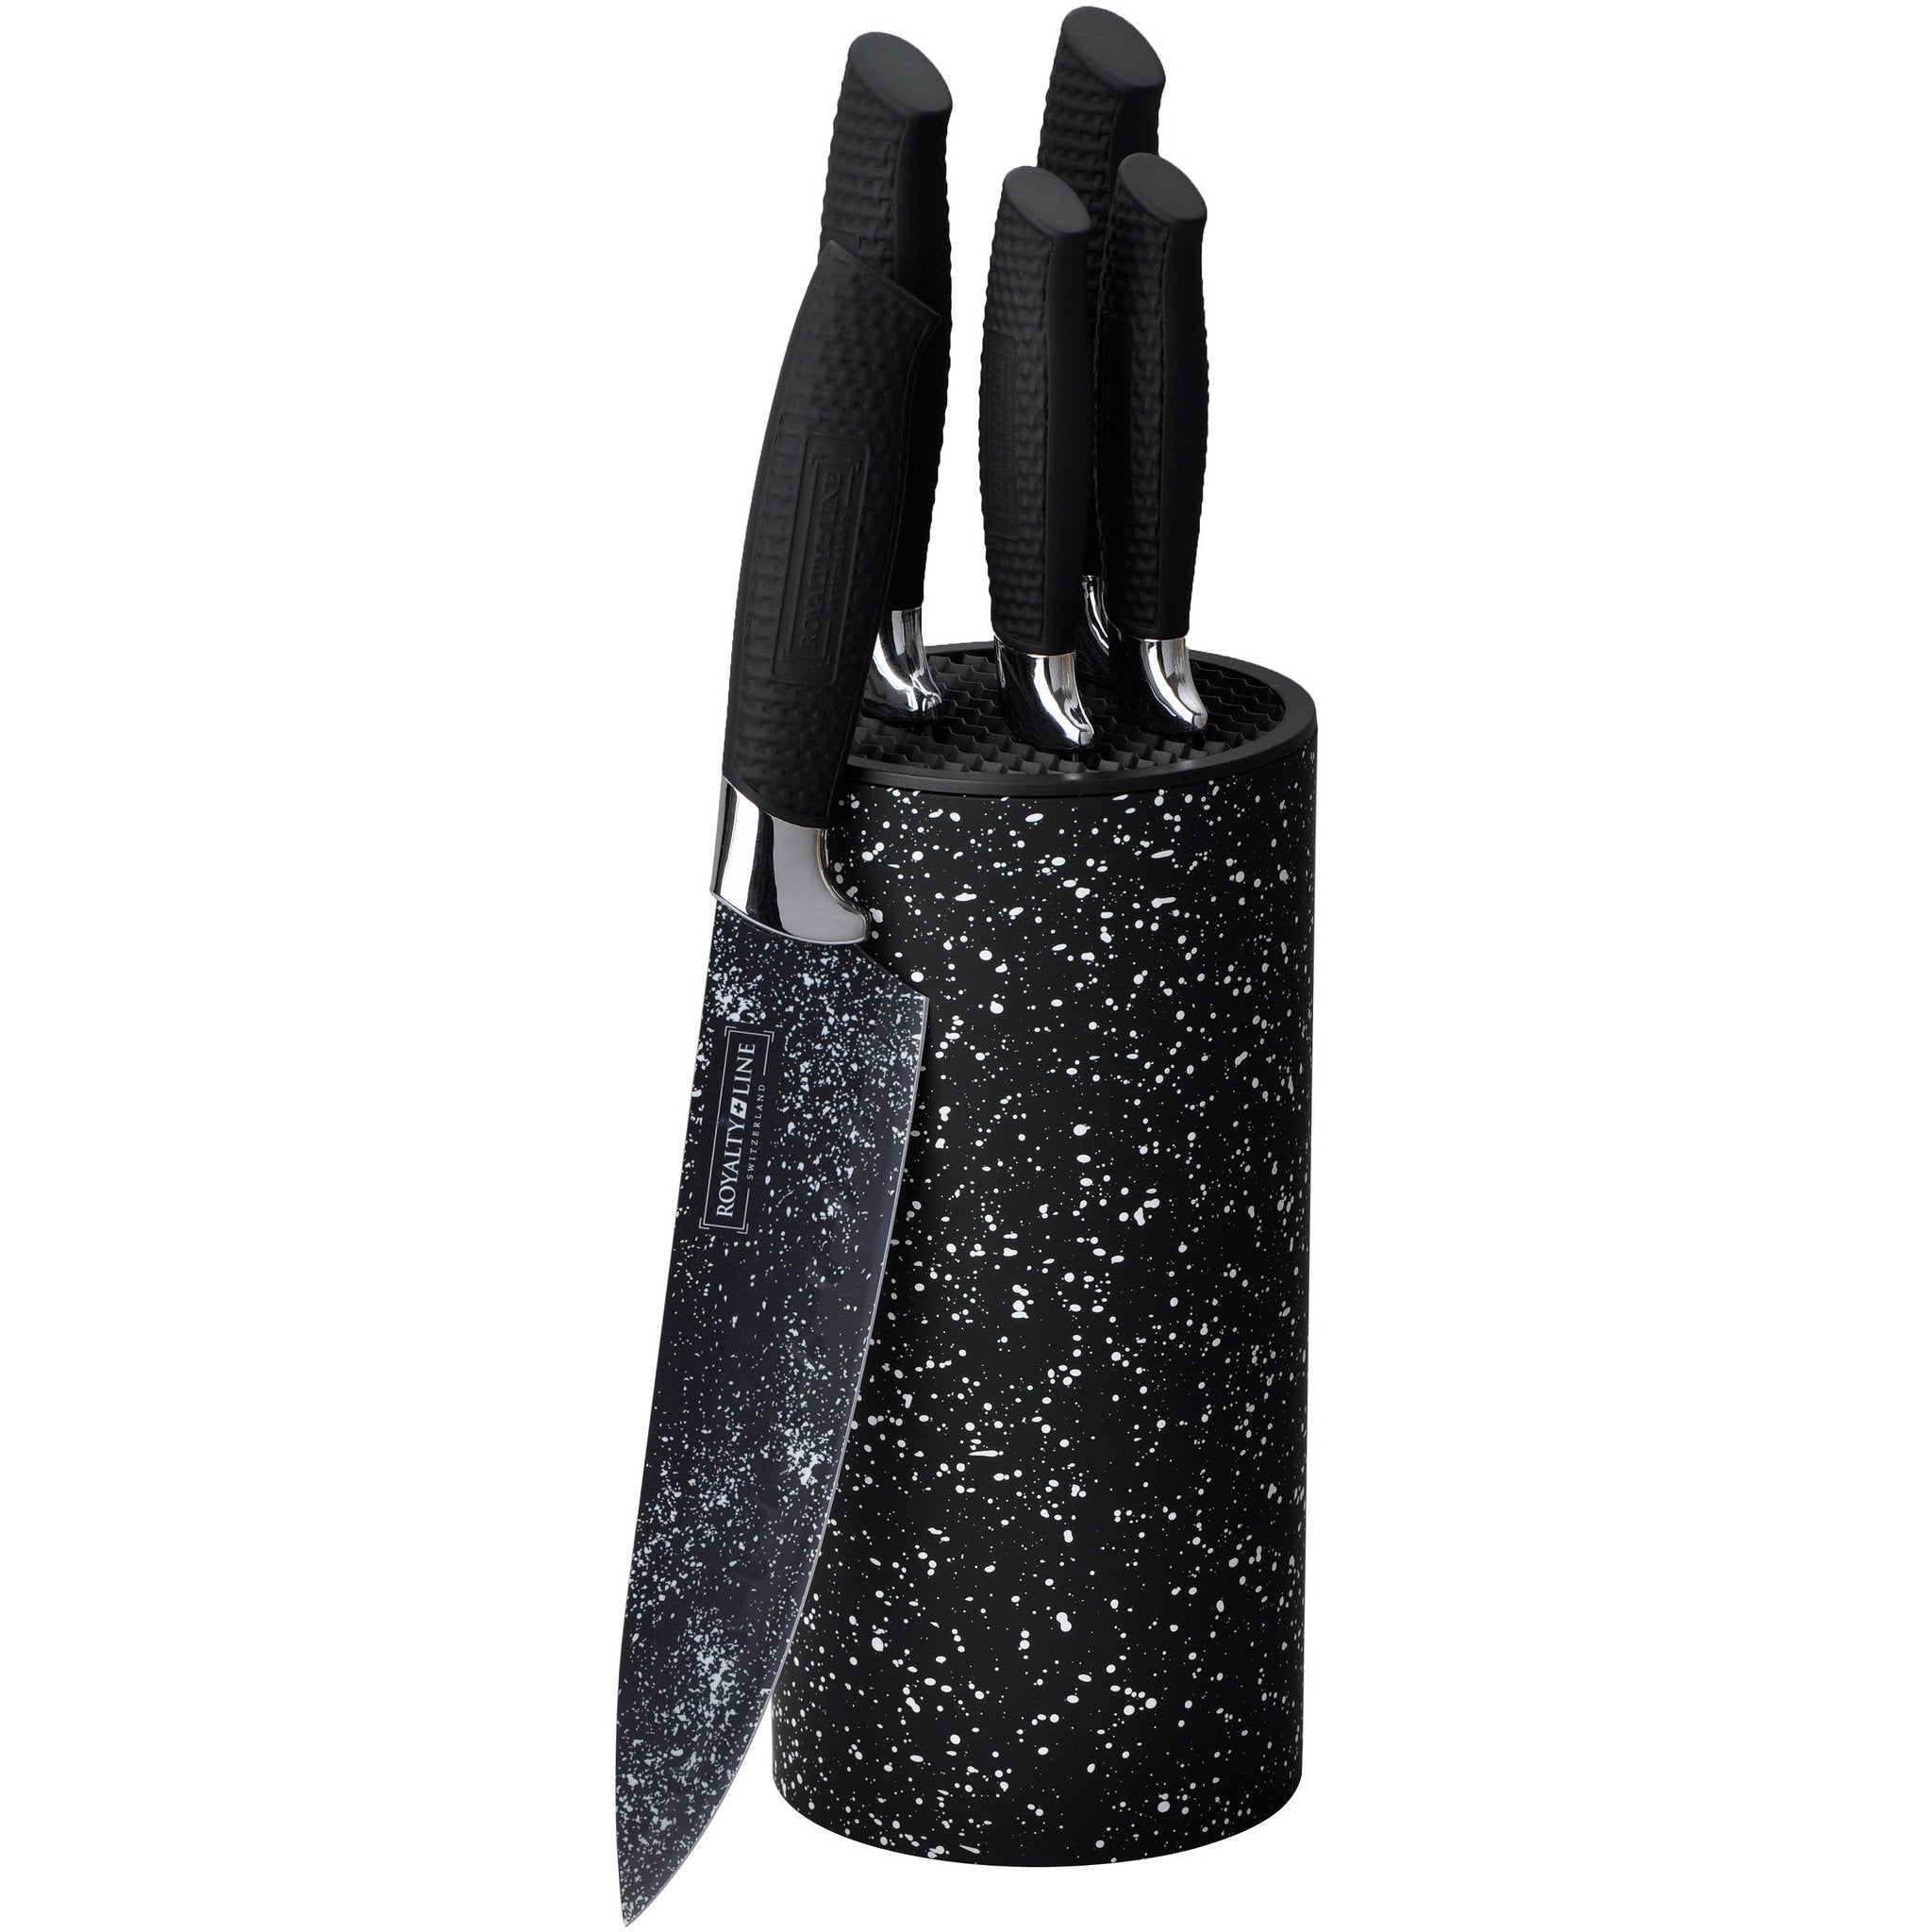 Royalty Line 5-Piece Non-Stick Knife set with Stand